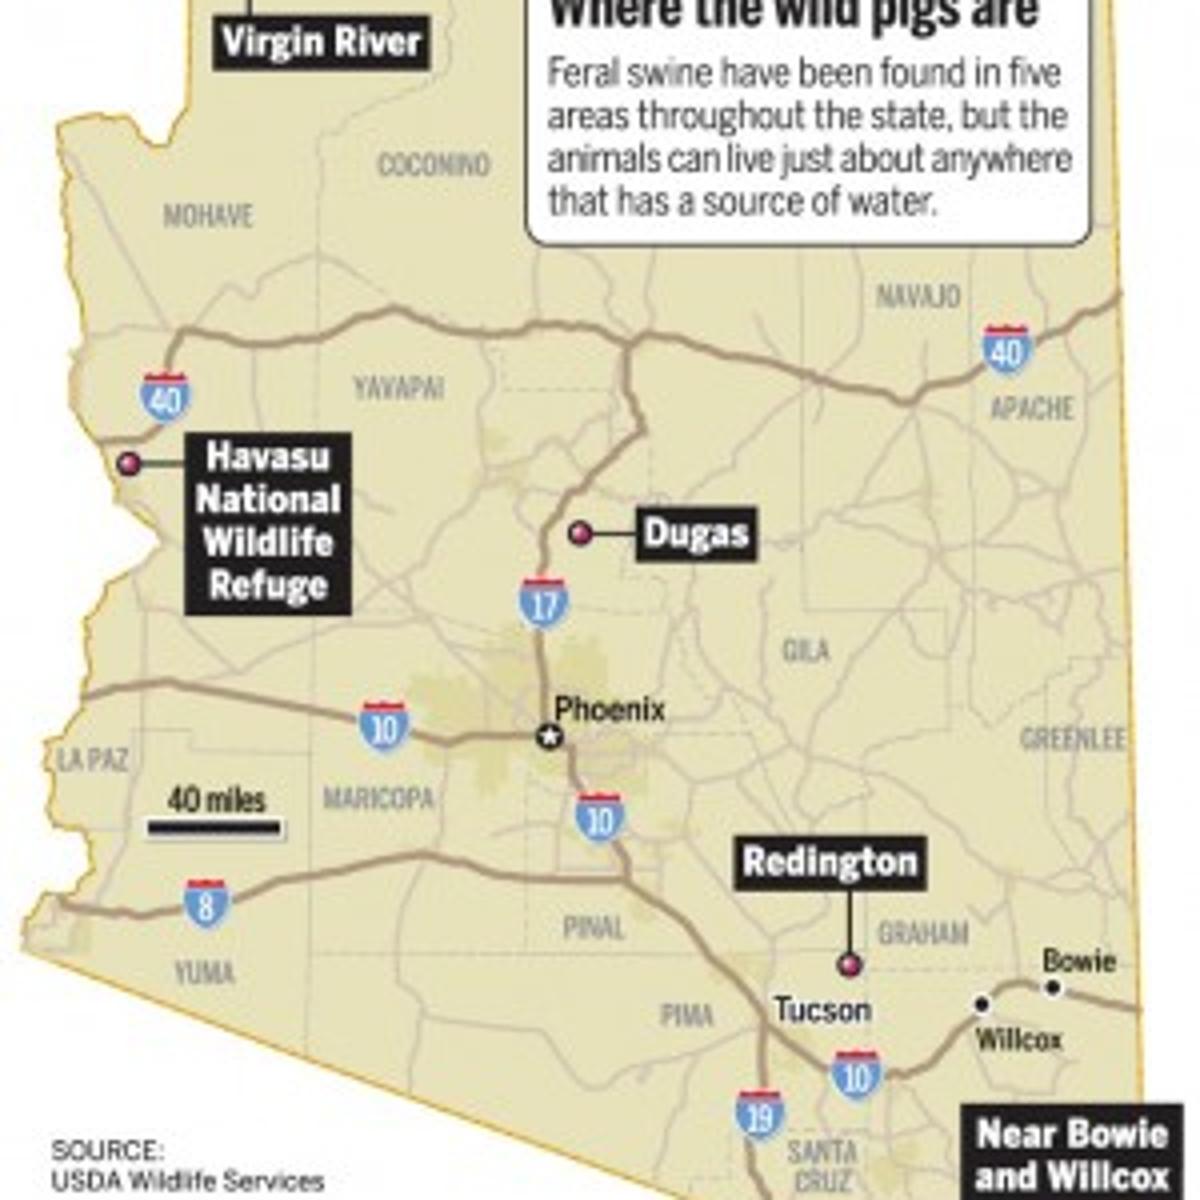 Only Lack Of Water Keeps Wild Pigs From Being State Menace